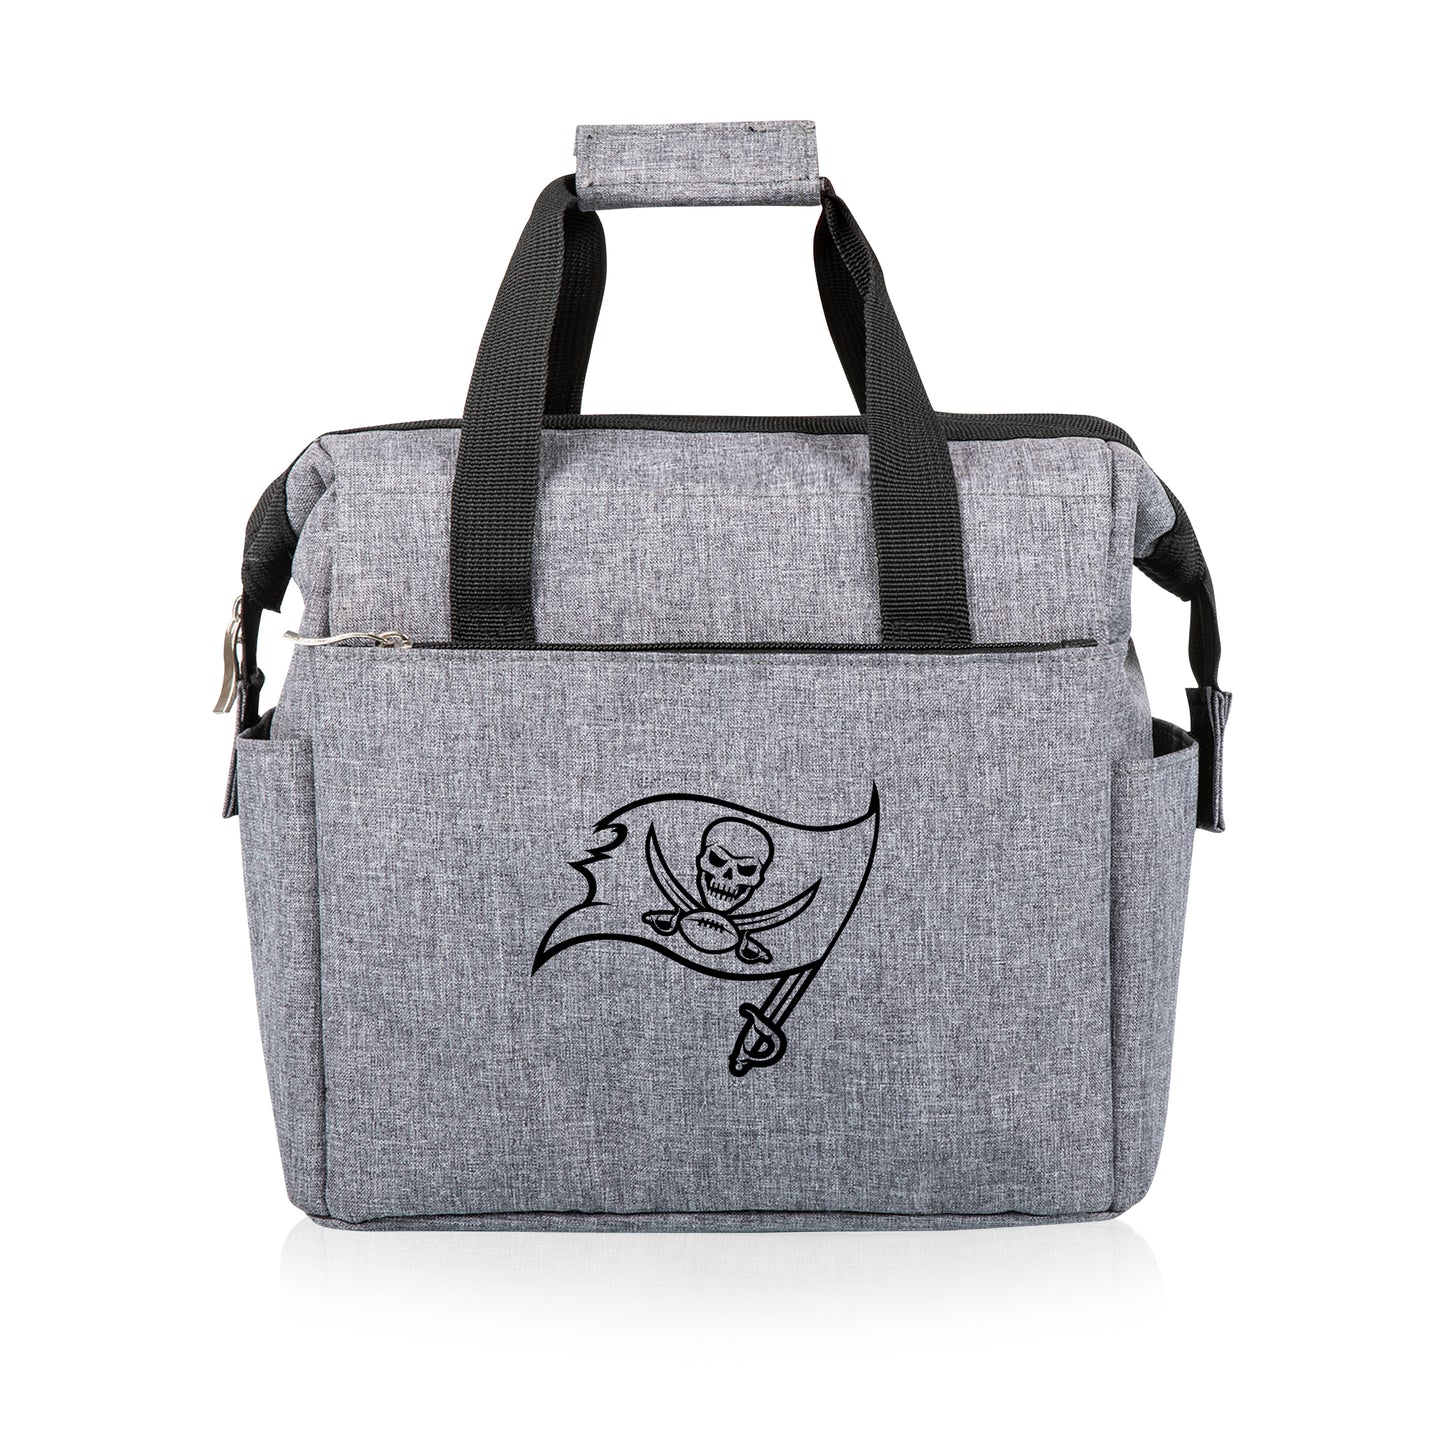 Tampa Bay Buccaneers - On The Go Lunch Cooler